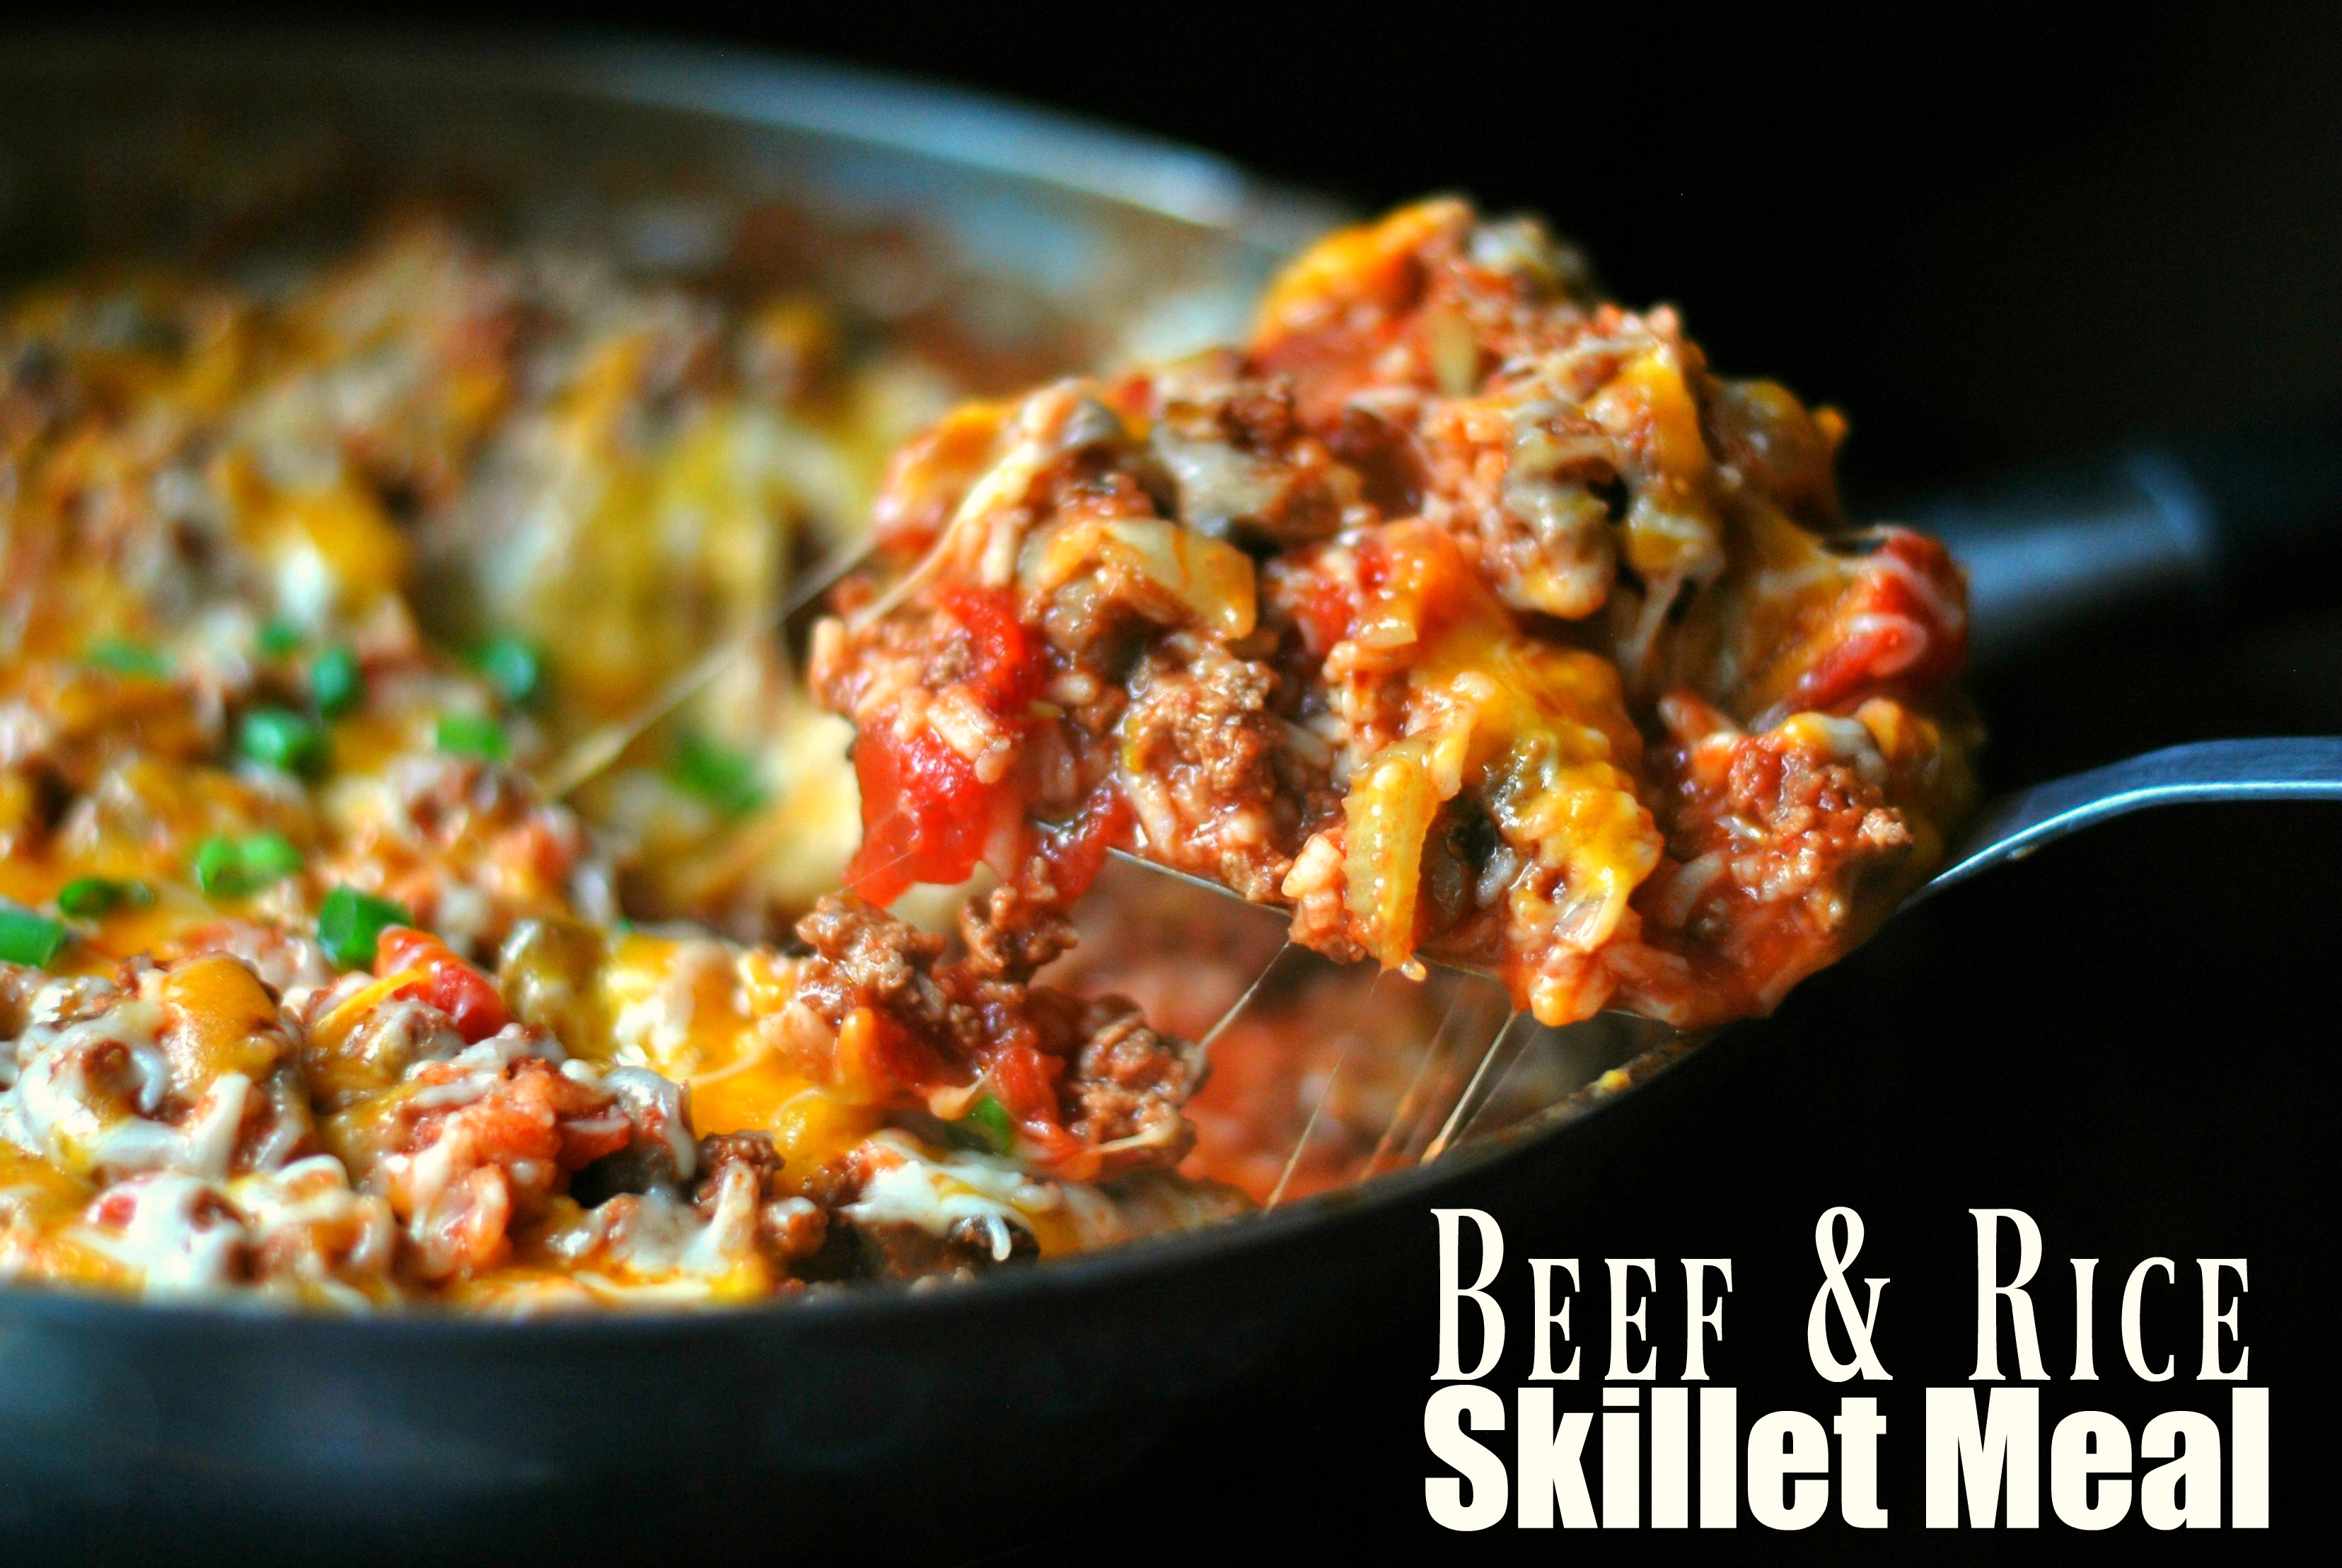 Beef & Rice Skillet Meal